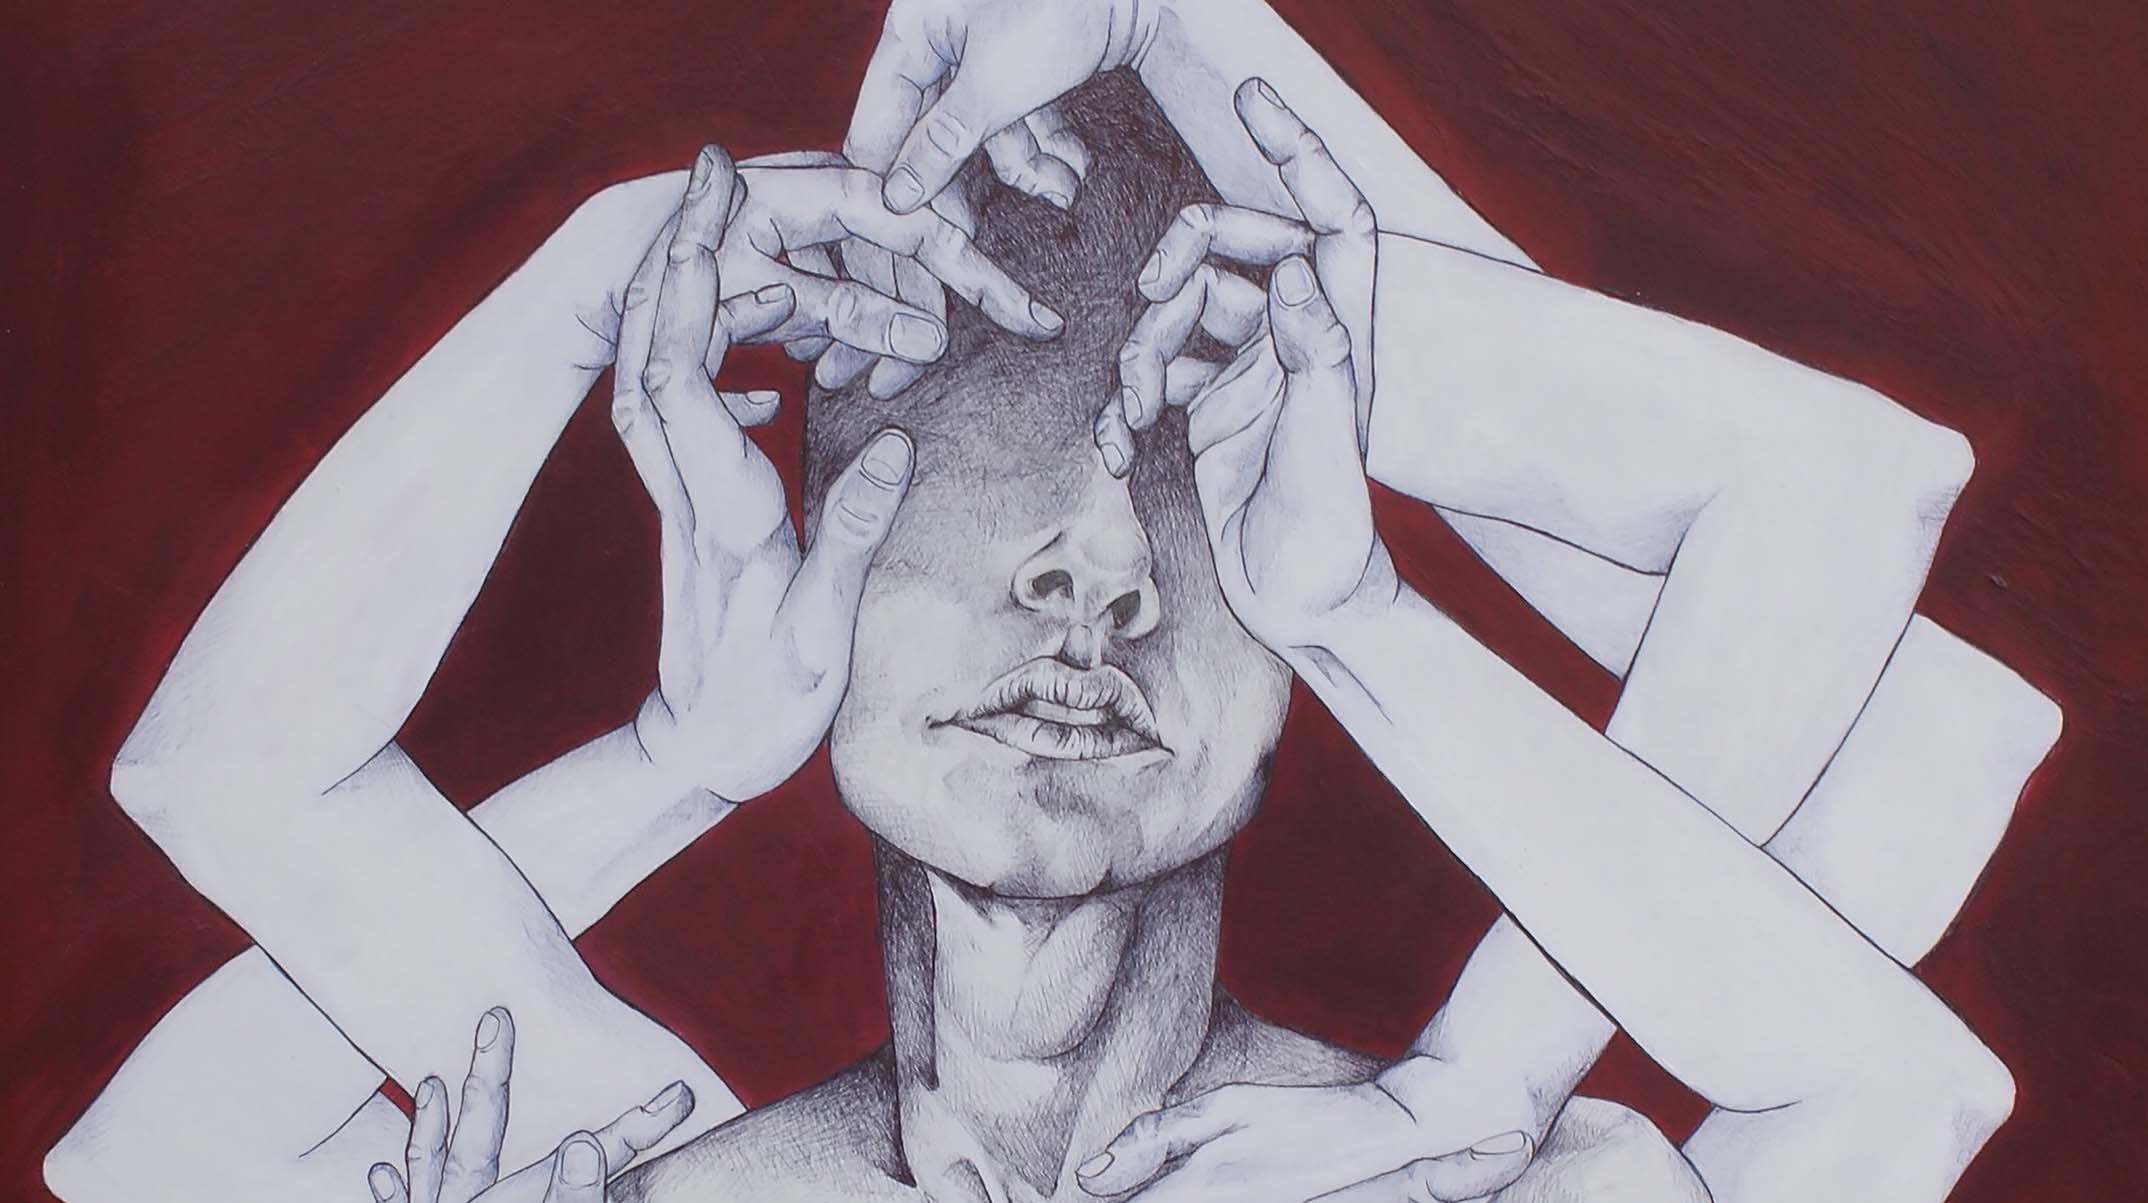 Cheyanne Silver's painting "Warm Blood" was inspired by her experience with a patient whose health continued to deteriorate. Silver uses her art as a way to process her own thoughts and emotions as a medical student. (Image: Courtesy Cheyanne Silver)